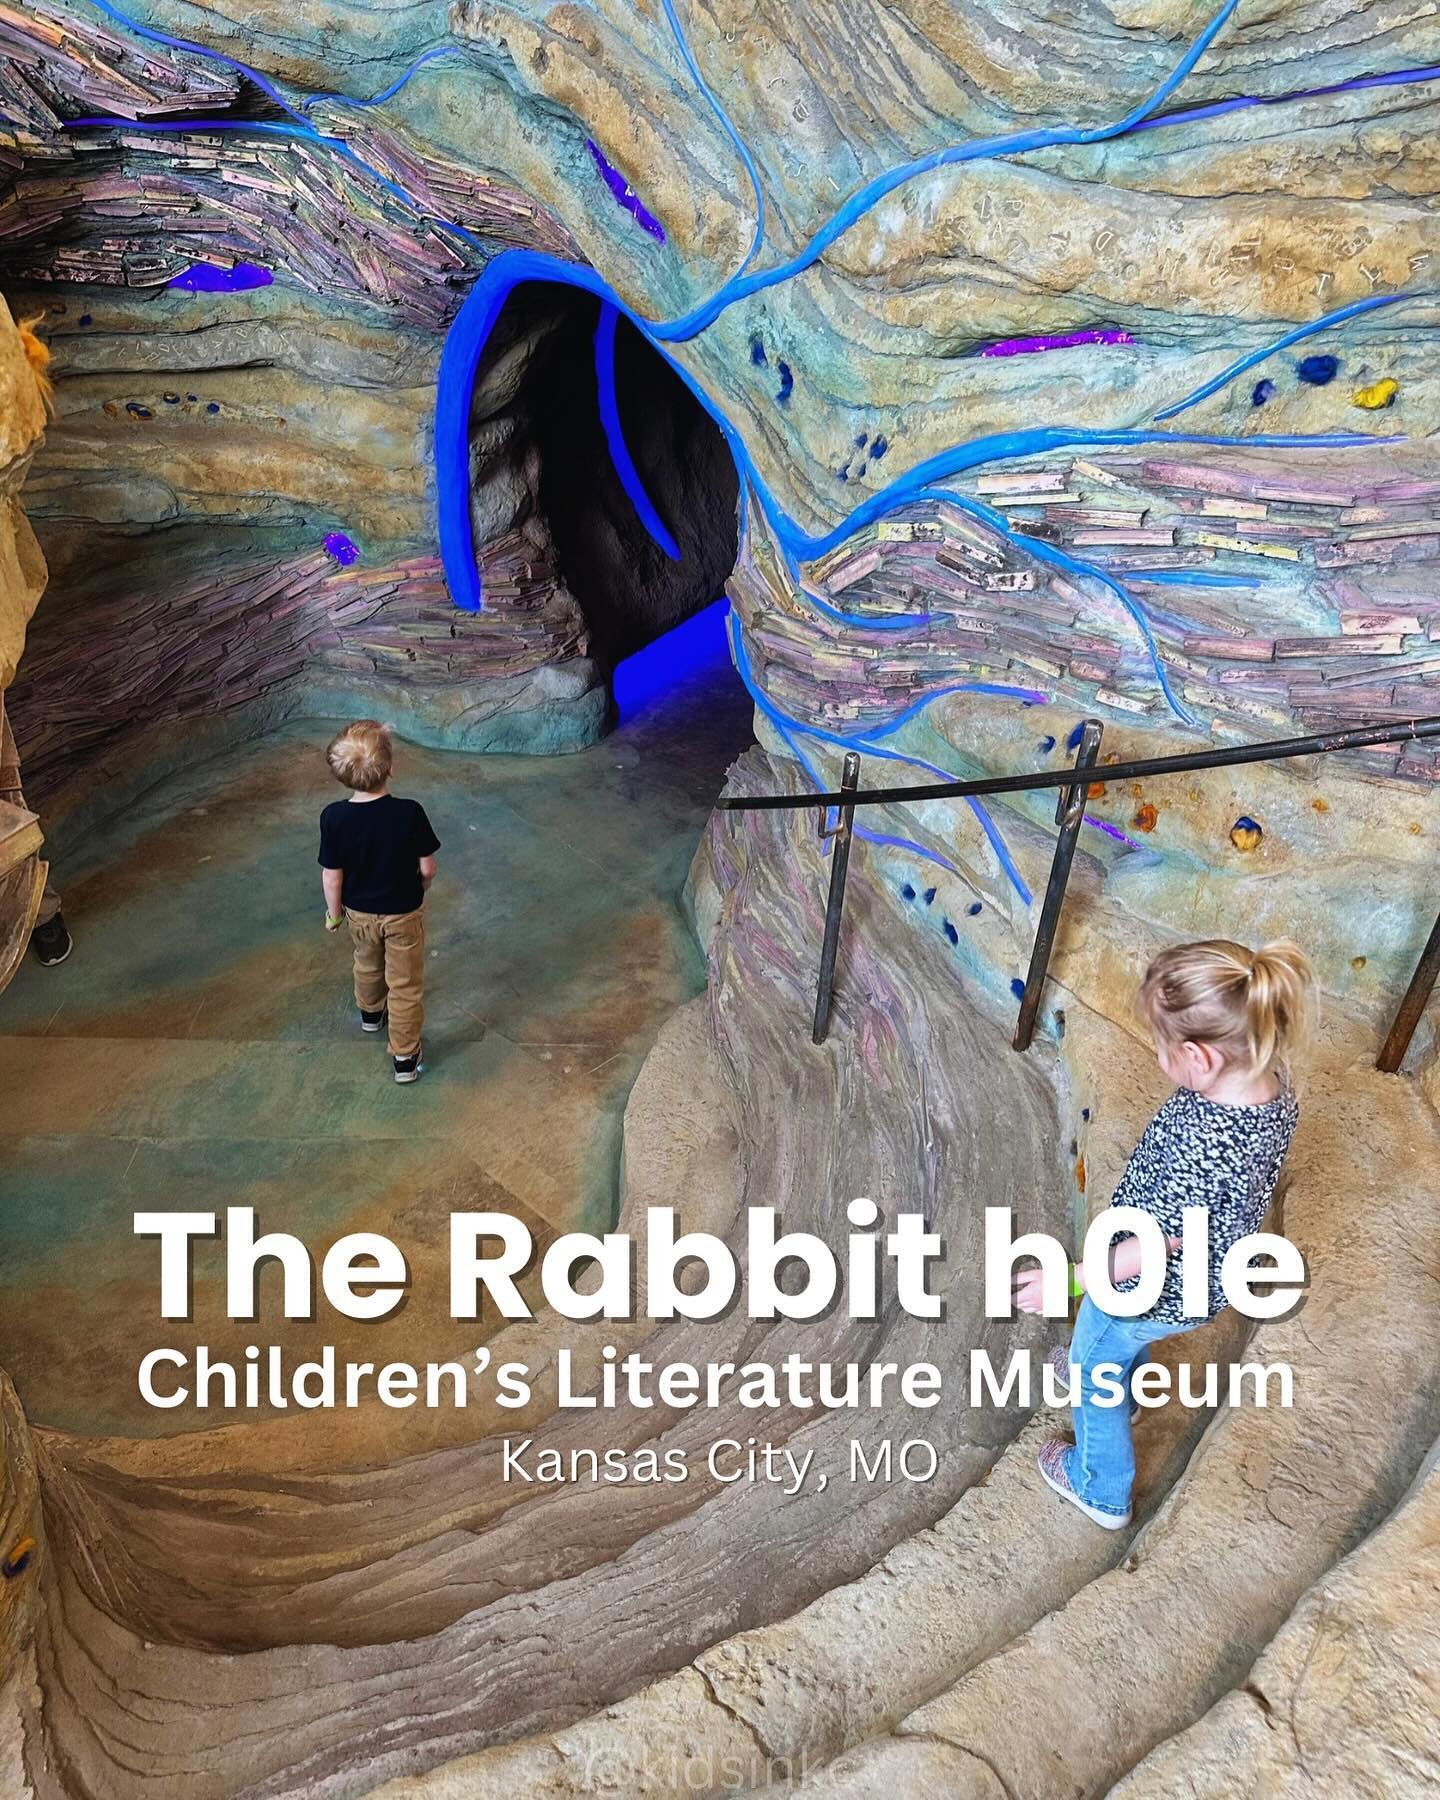 If you love children&rsquo;s books, nostalgia, beautiful artwork, and interactive spaces, @rabbit_hole_kc in Kansas City is for you. 📚This immersive, all-ages museum took many years of hard work and dedication to create such a beautiful space. It wi